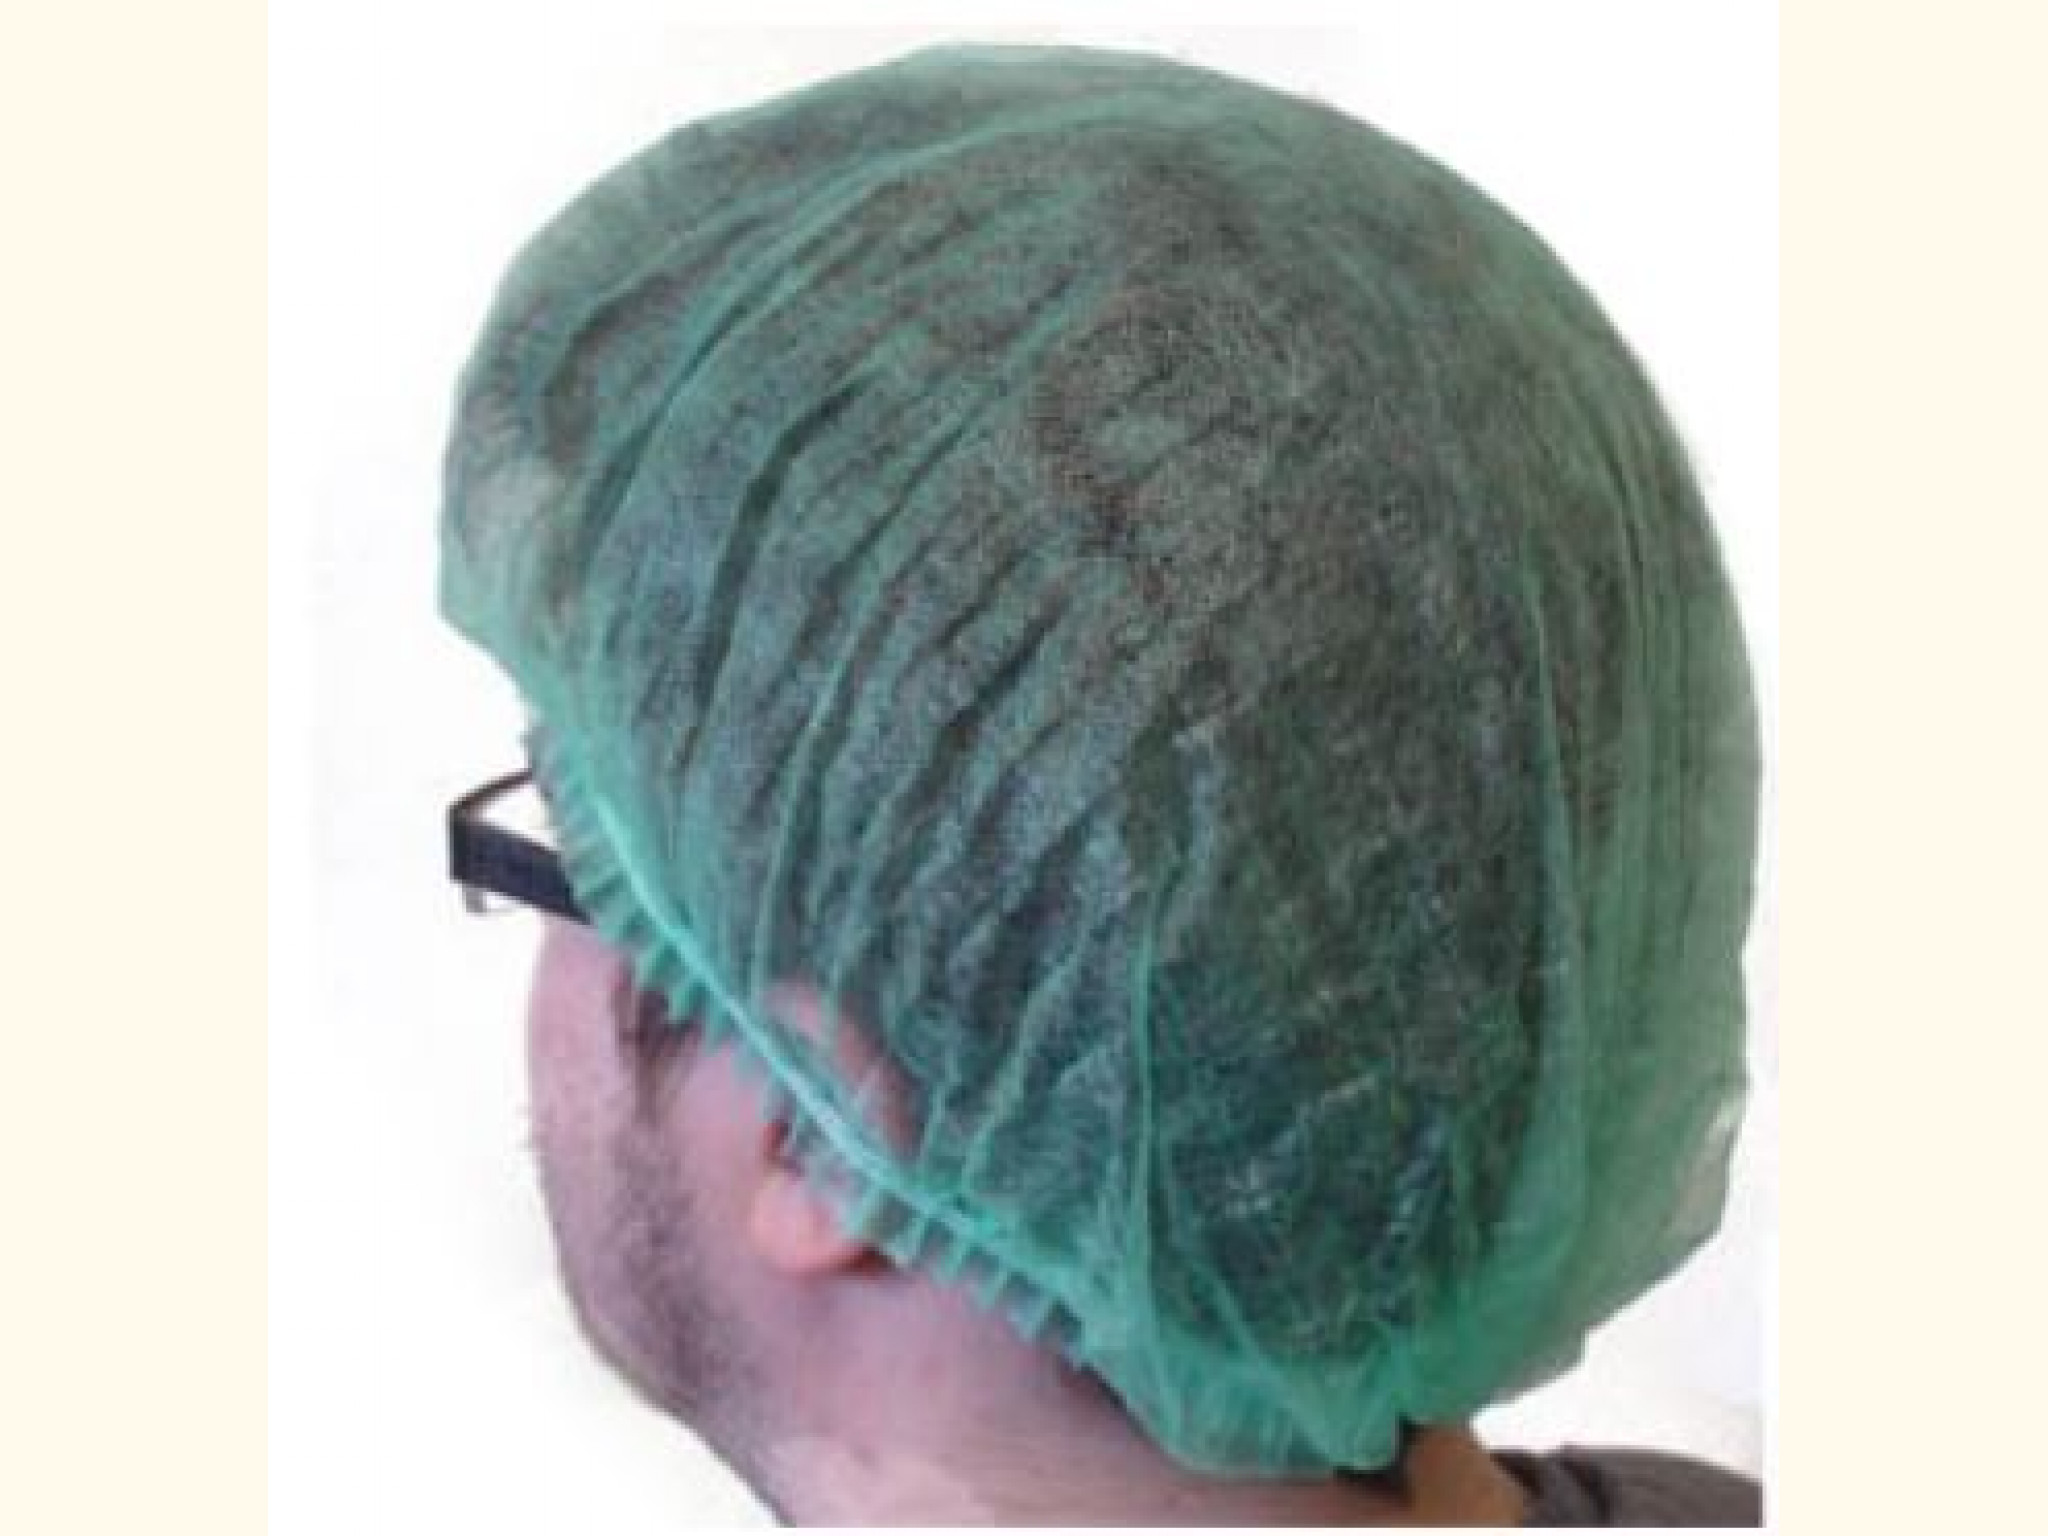 Blue Medical Hair Net - Prevents Contamination and Keeps Hair in Place - wide 4